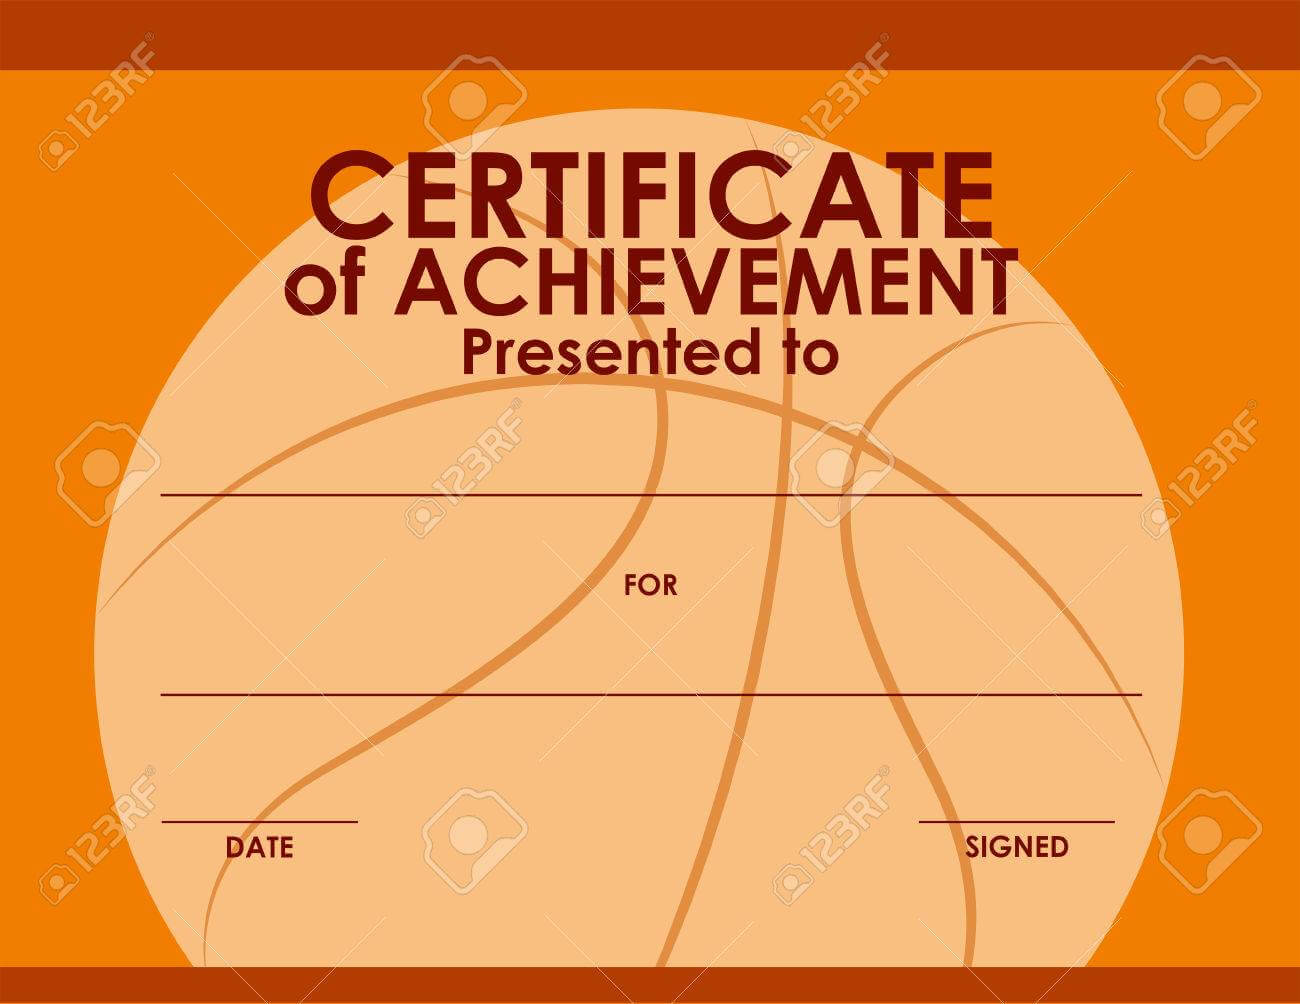 Certificate Template With Basketball Background Illustration Within Basketball Certificate Template